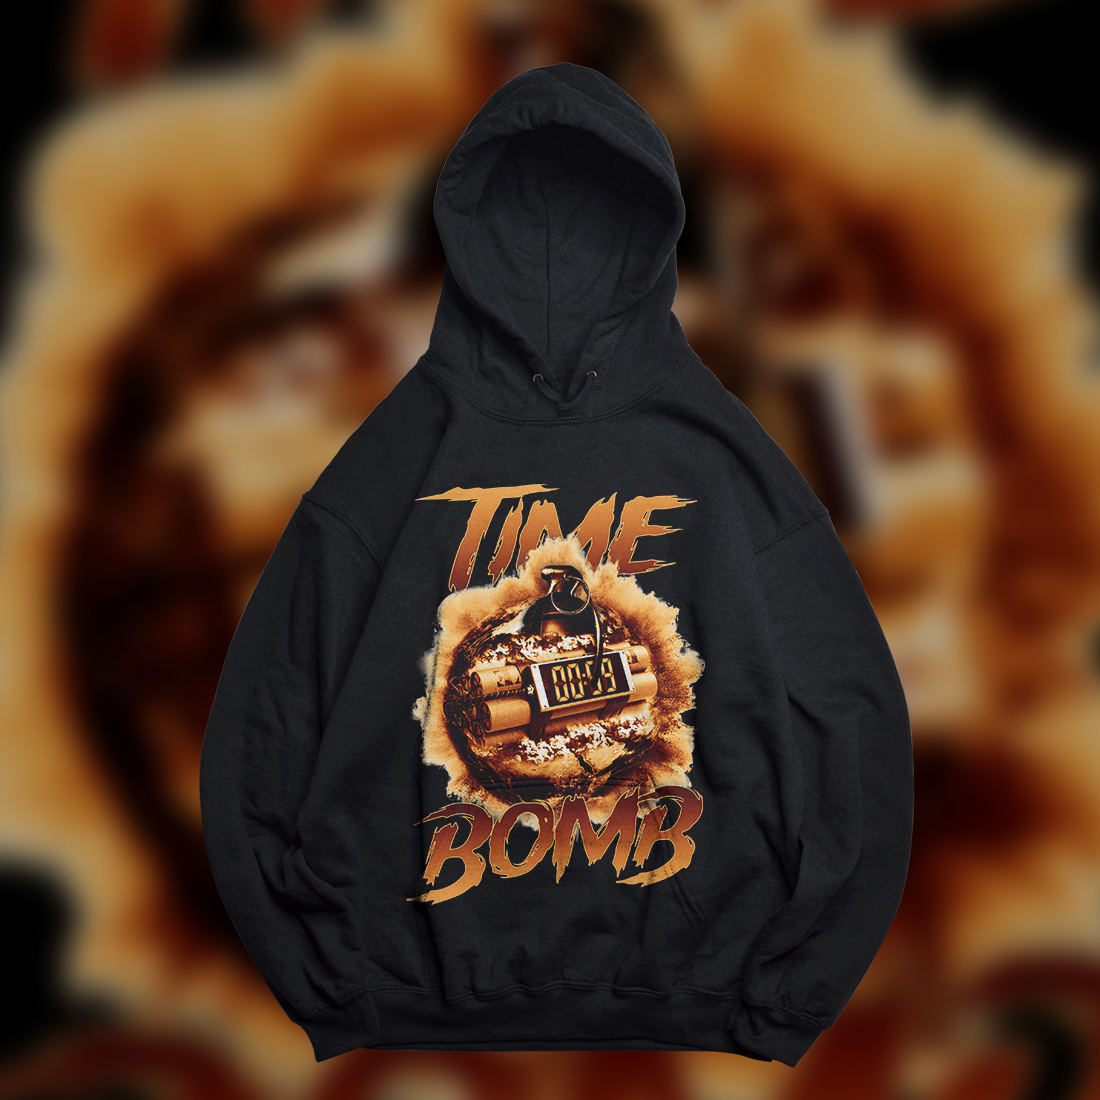 Time Bomb – Urban Graphic Streetwear T-Shirt Design cover image.